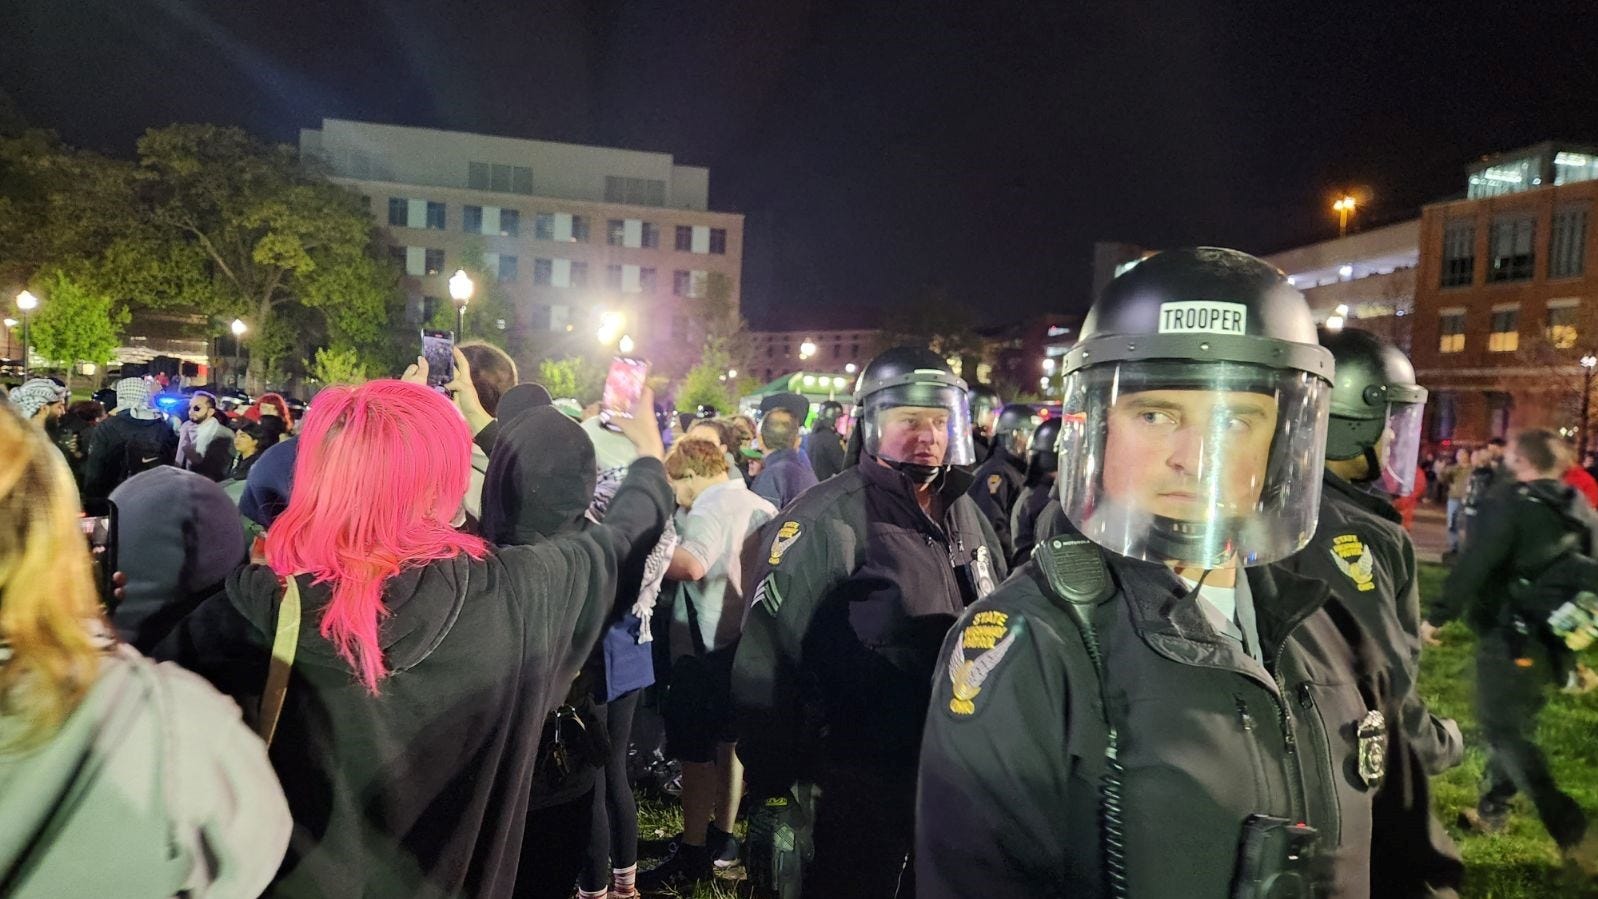 Police confirm 36 arrested at OSU anti-Israel protest Thursday night